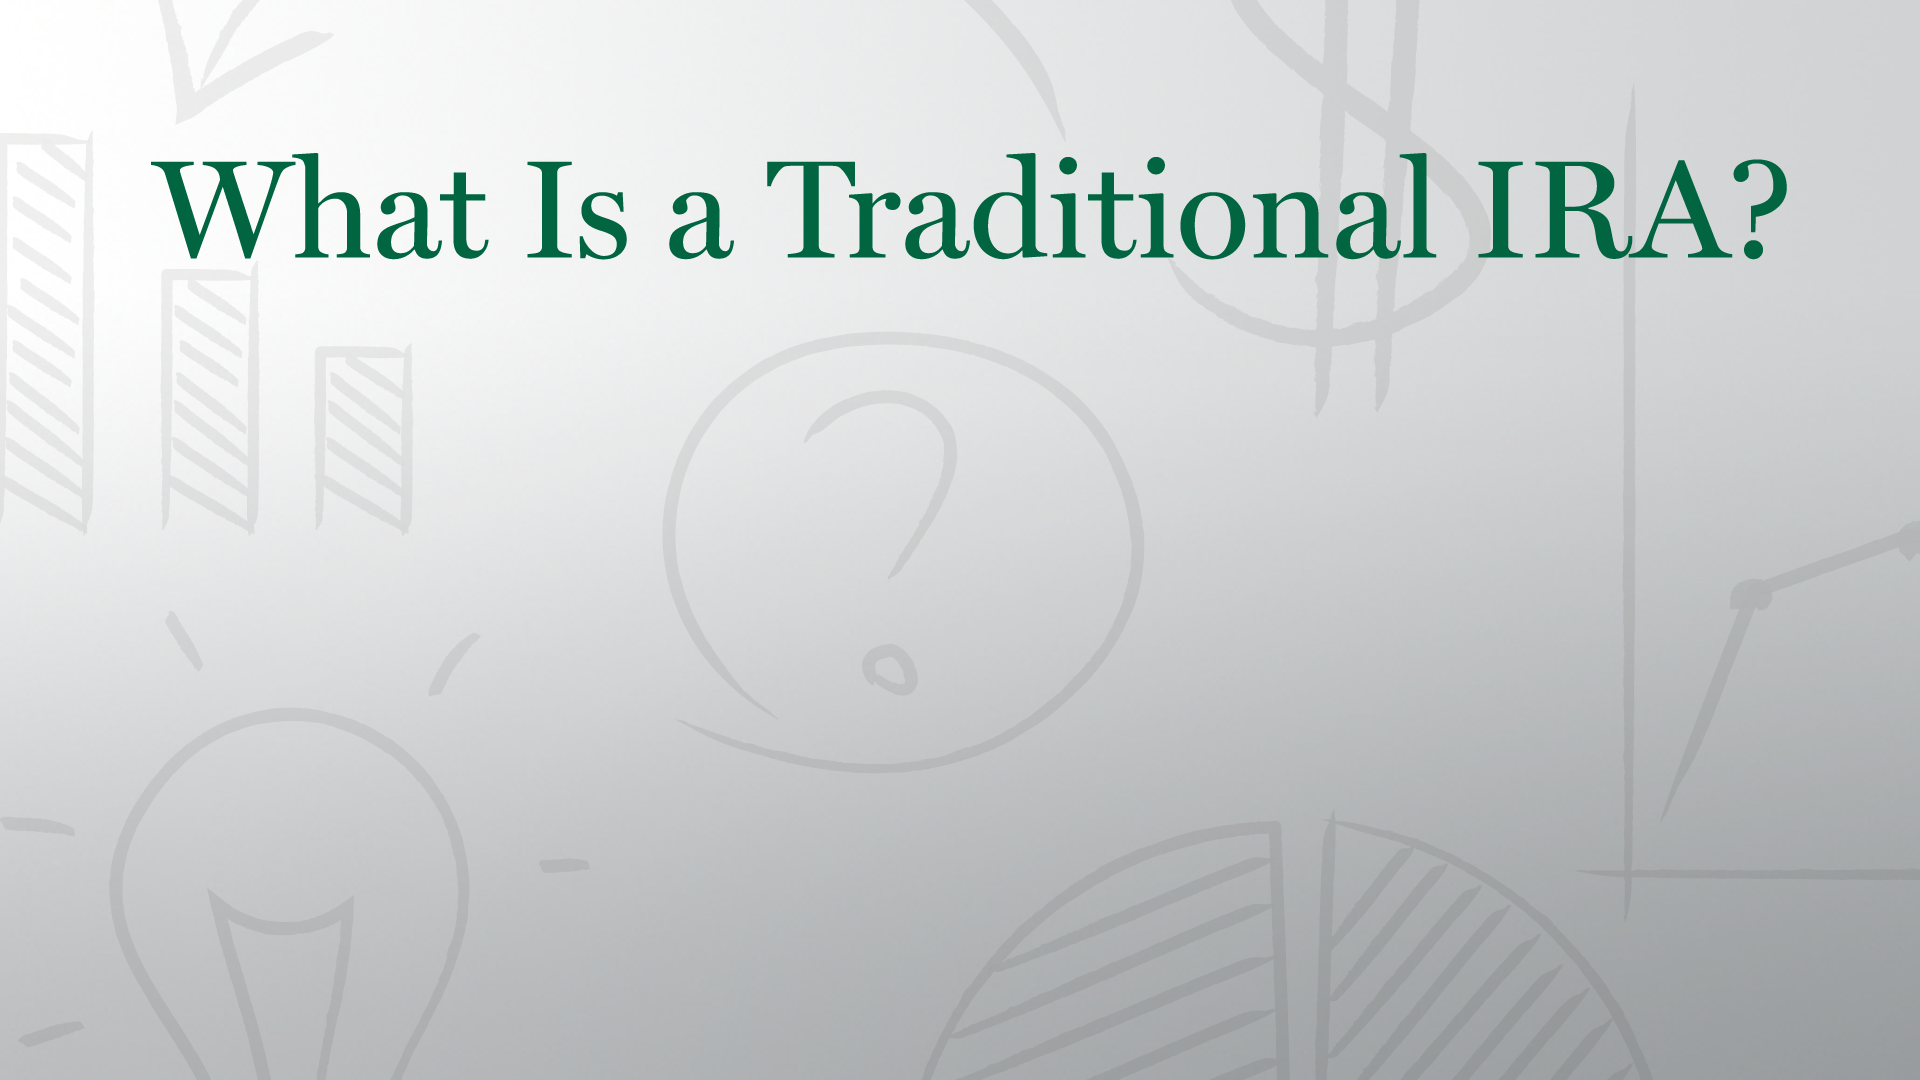 What Is a Traditional IRA?